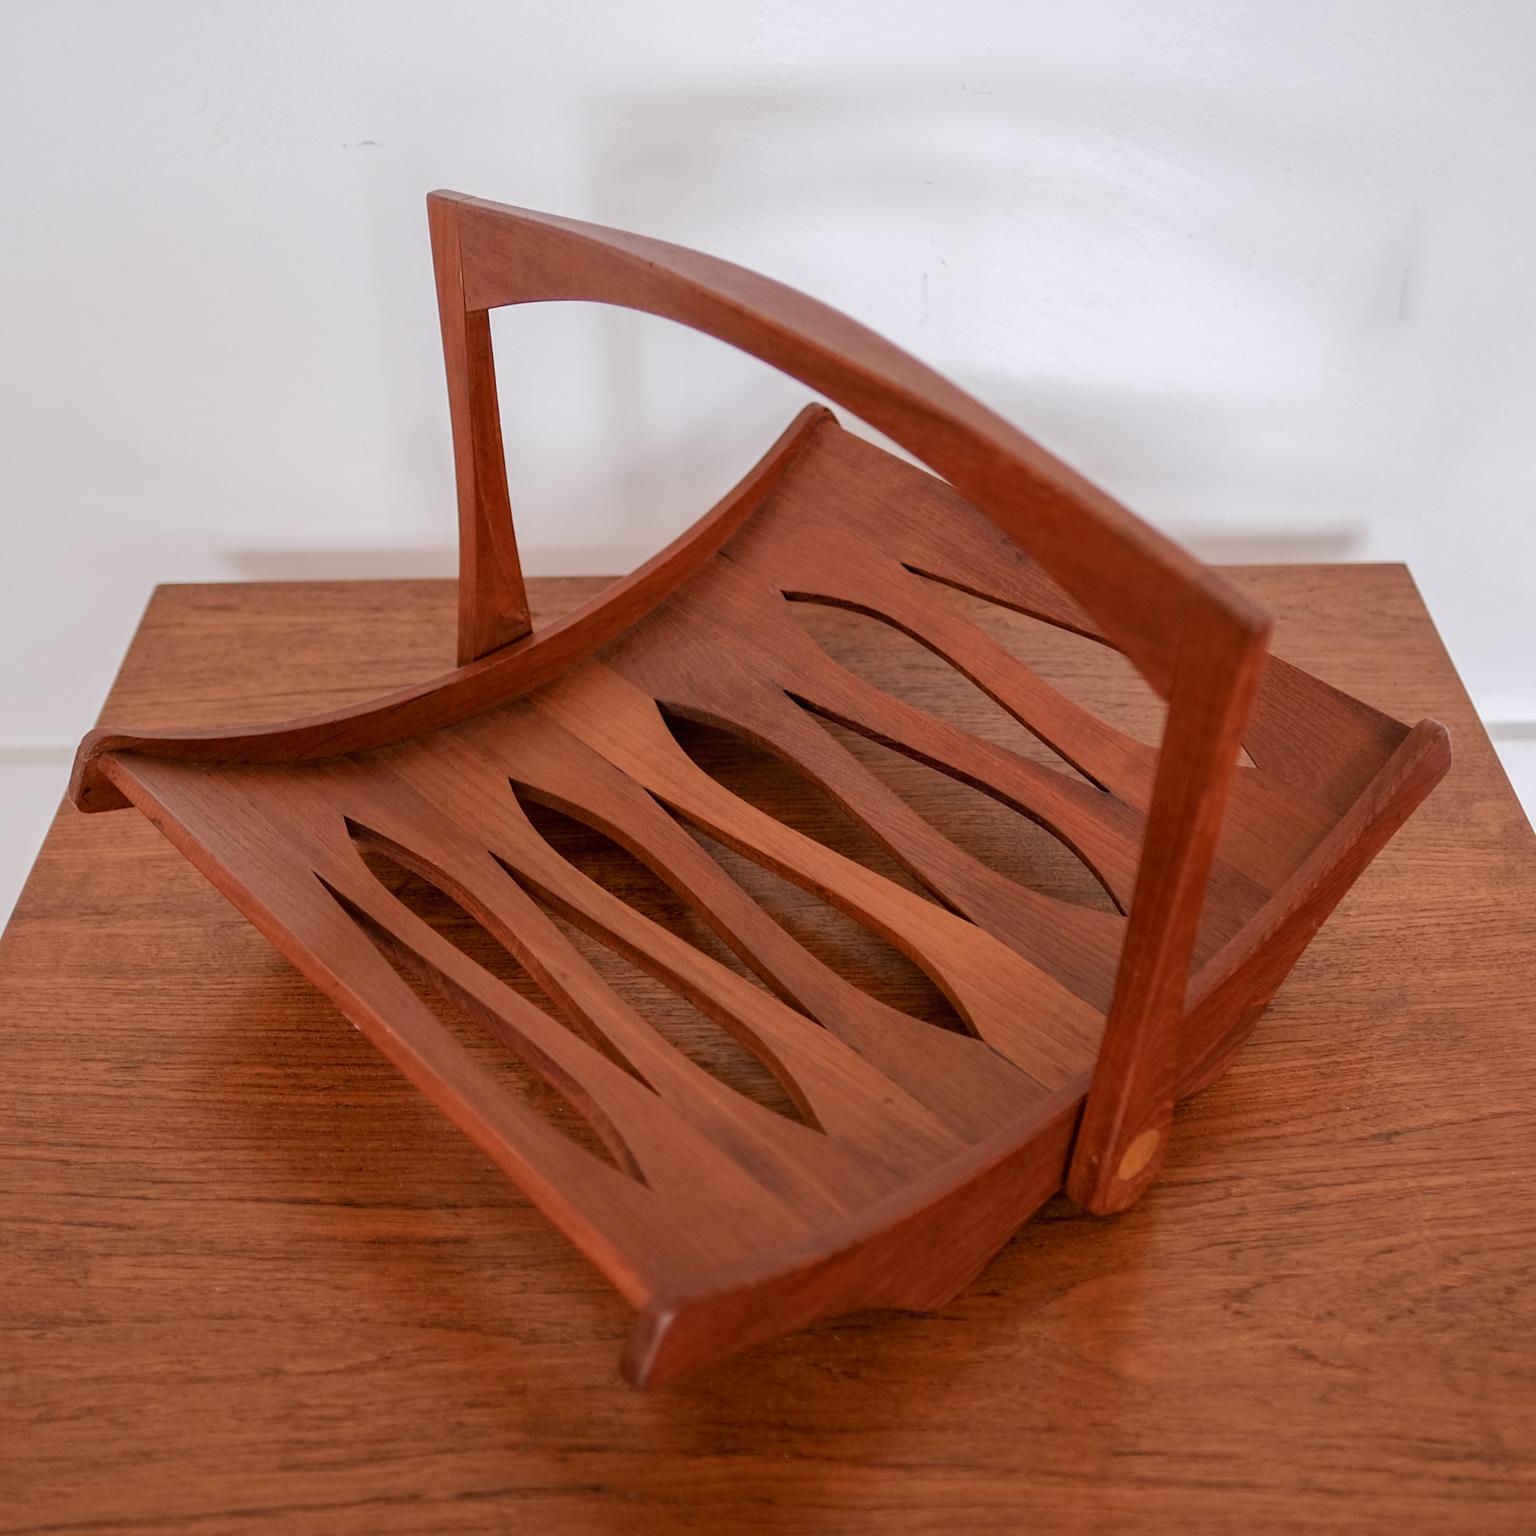 Magazine rack designed by Jens Quistgaard for Dansk. Staved solid teak frame with collapsible handle. Branded on the bottom with JHQ and early Dansk logo. Excellent joinery detailing. Denmark, 1960s.